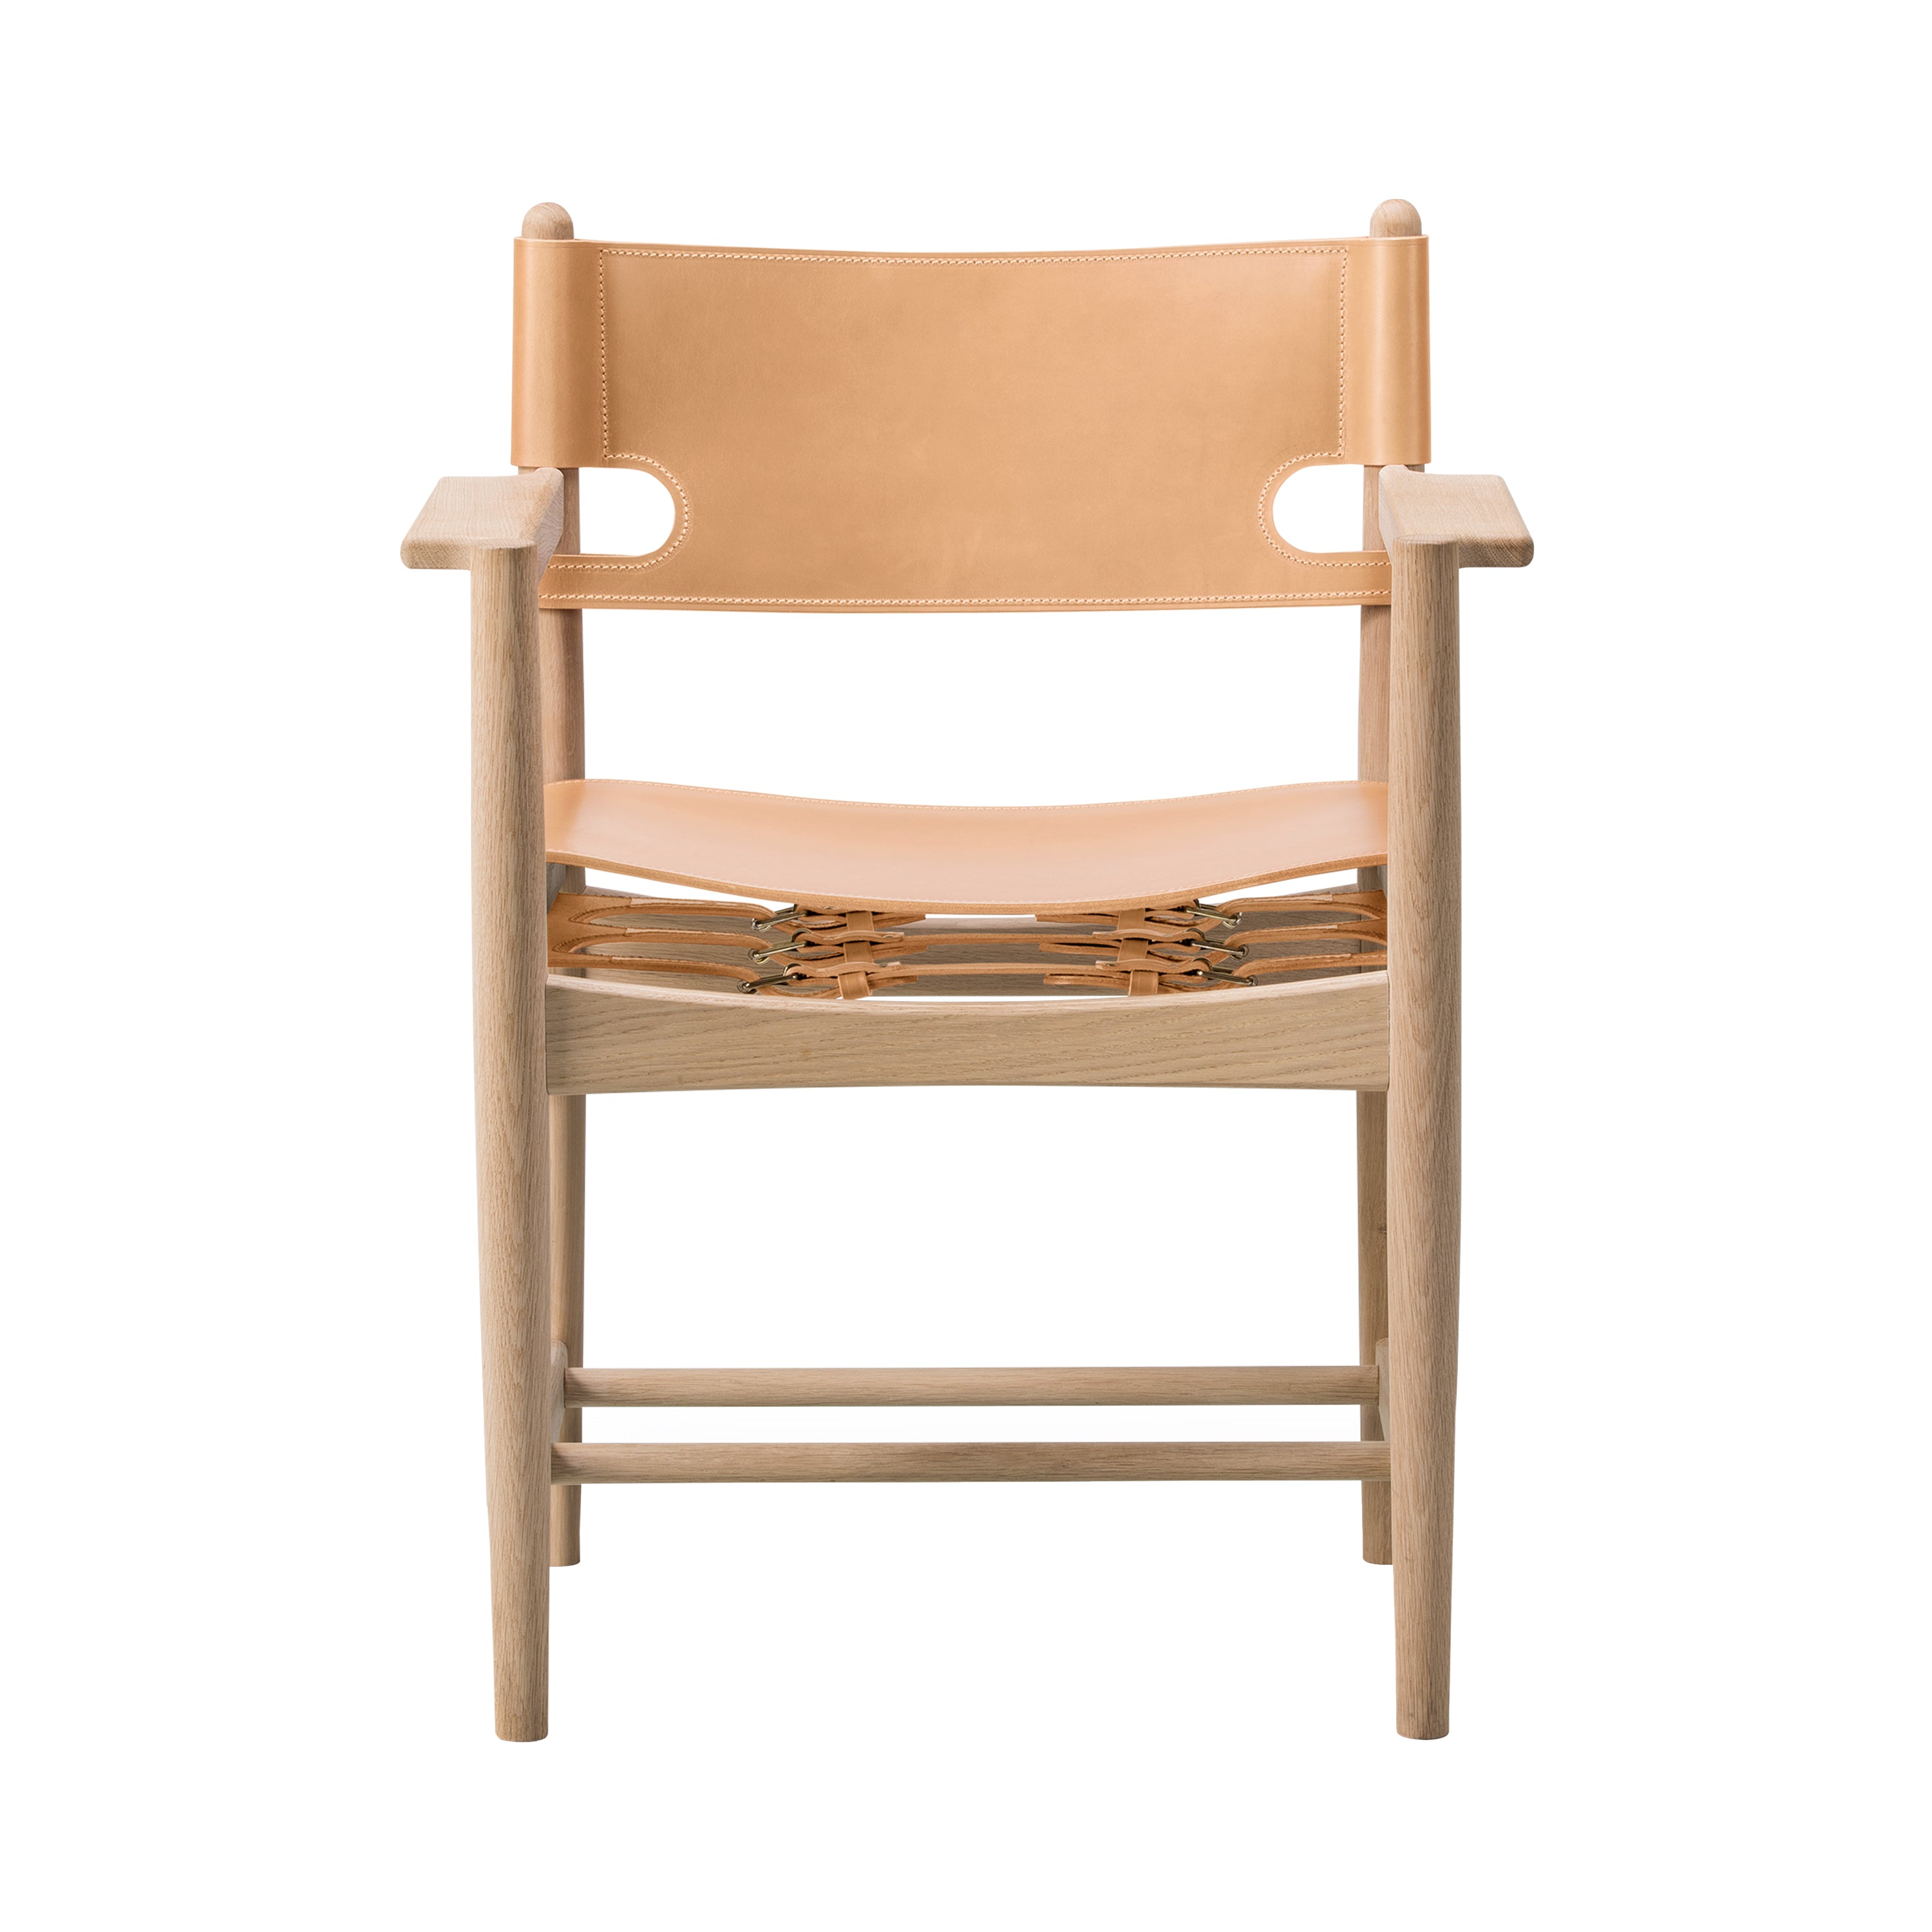 The Spanish Dining Chair: With Arm + Soaped Oak + Natural